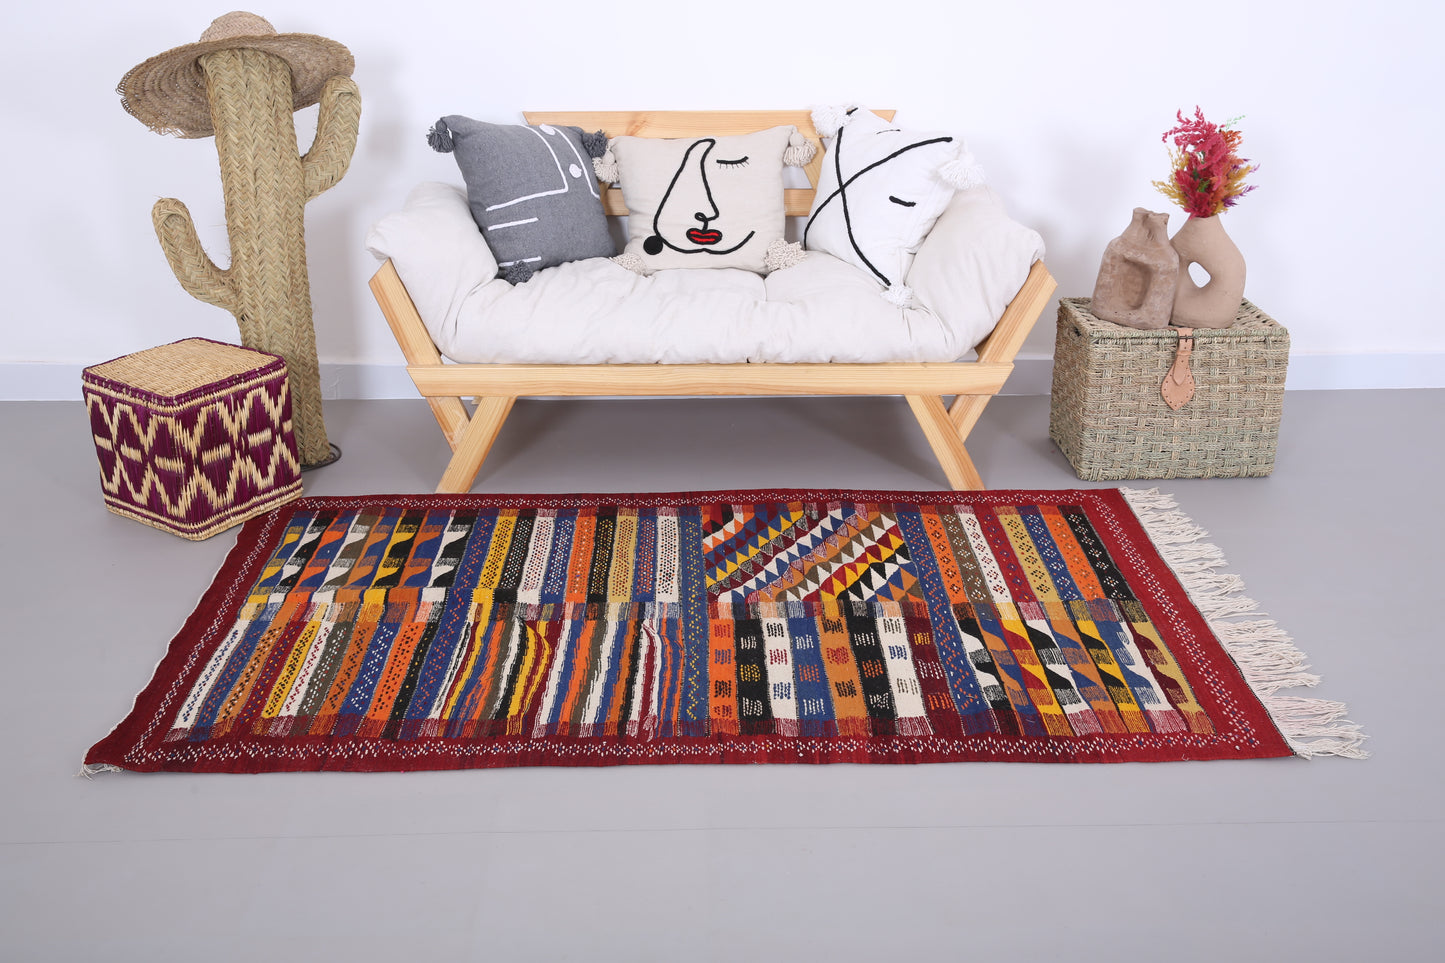 Handwoven picasso kilim rug 3.7 FT X 6.5 FT